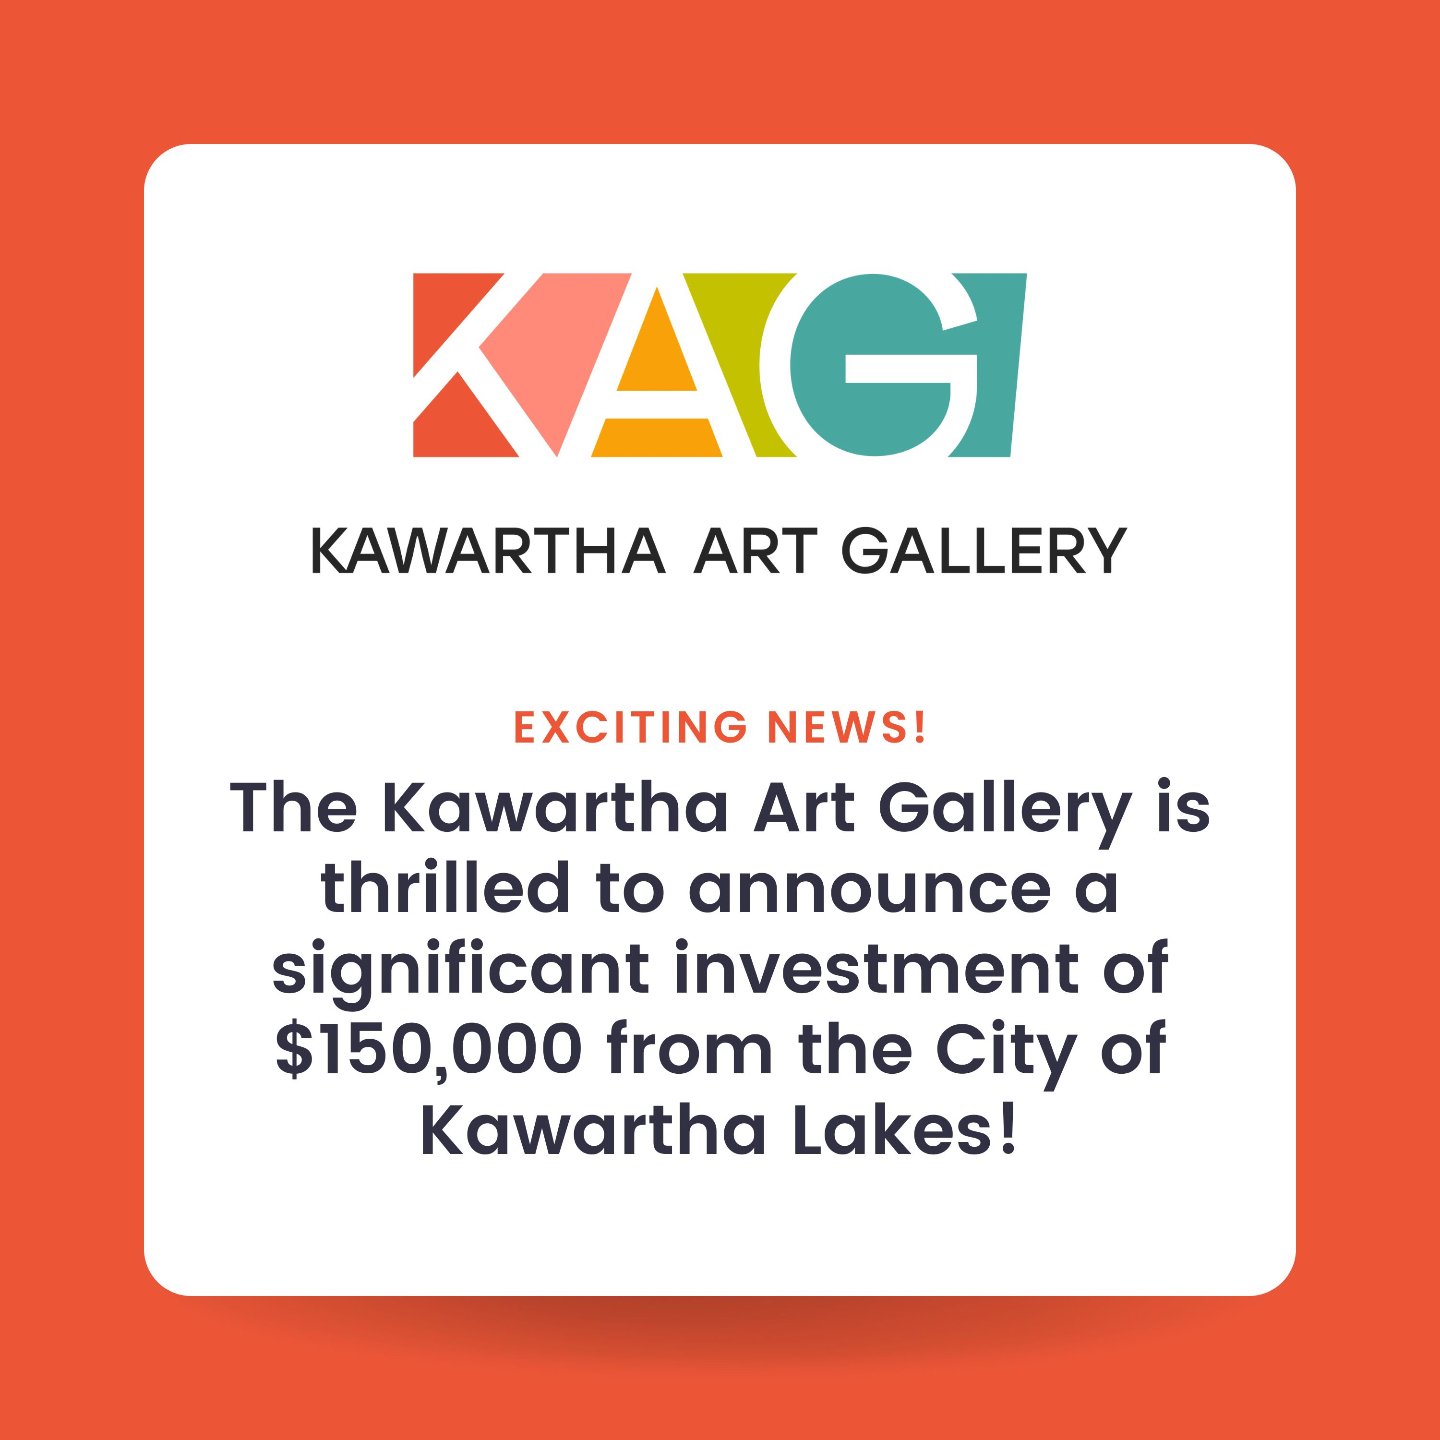 The Kawartha Art Gallery (KAG) is thrilled to announce a significant investment of $150,000 from the City of Kawartha Lakes 🎉 This generous contribution will provide vital support for the Gallery&rsquo;s ongoing operations and exciting new initiativ